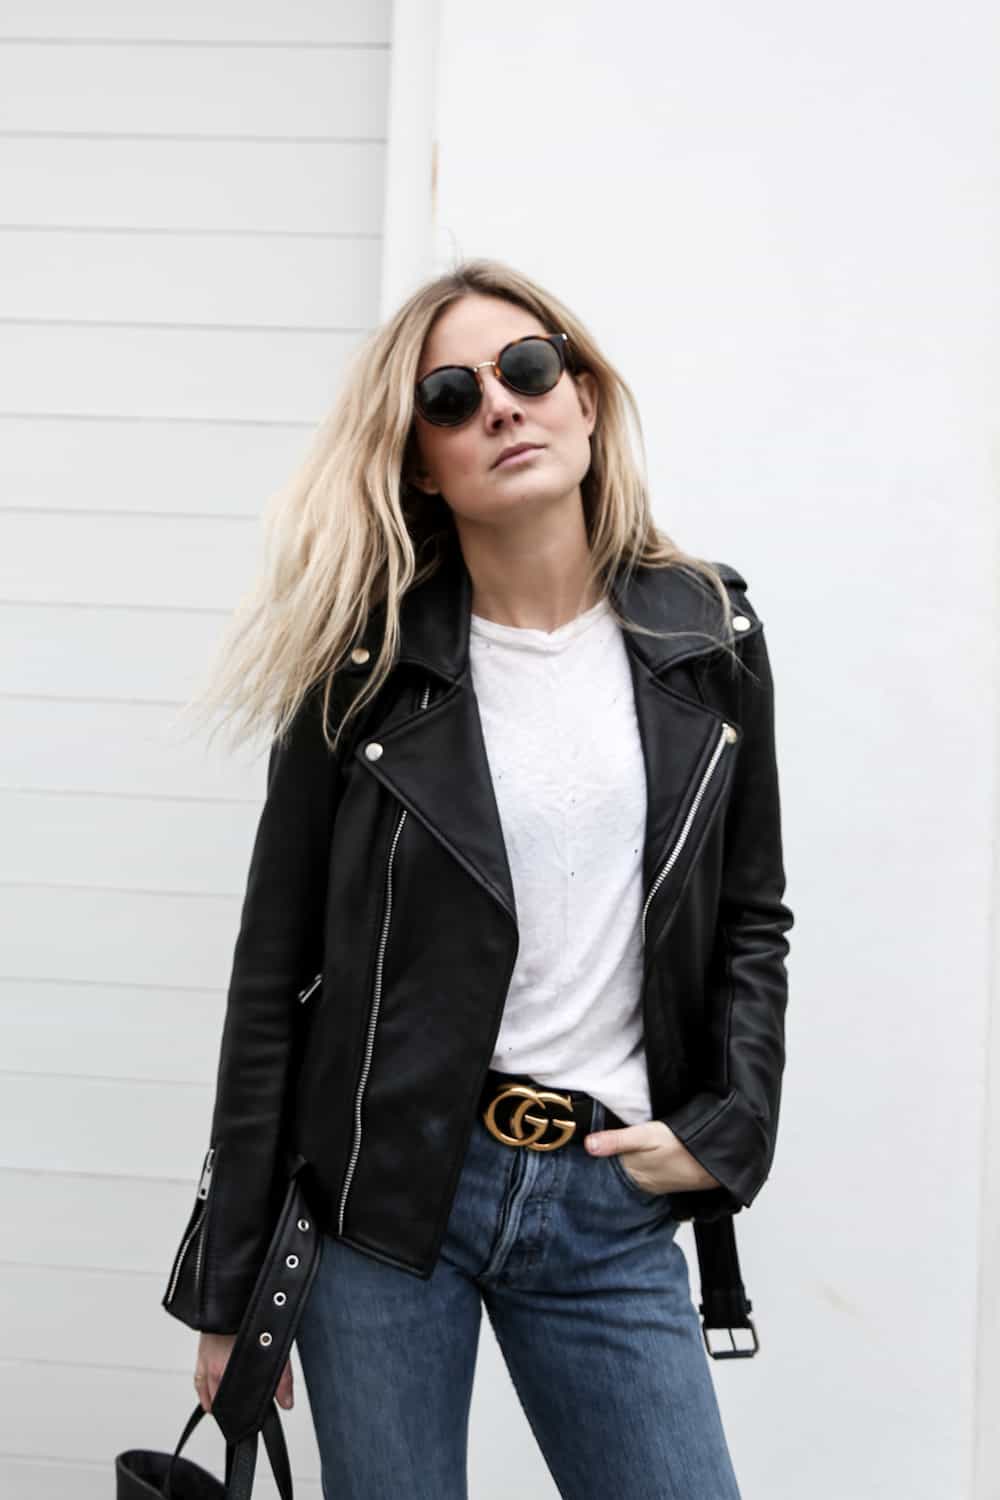 image of a woman wearing a leather jacket, white t-shirt, black Gucci belt, and blue jeans